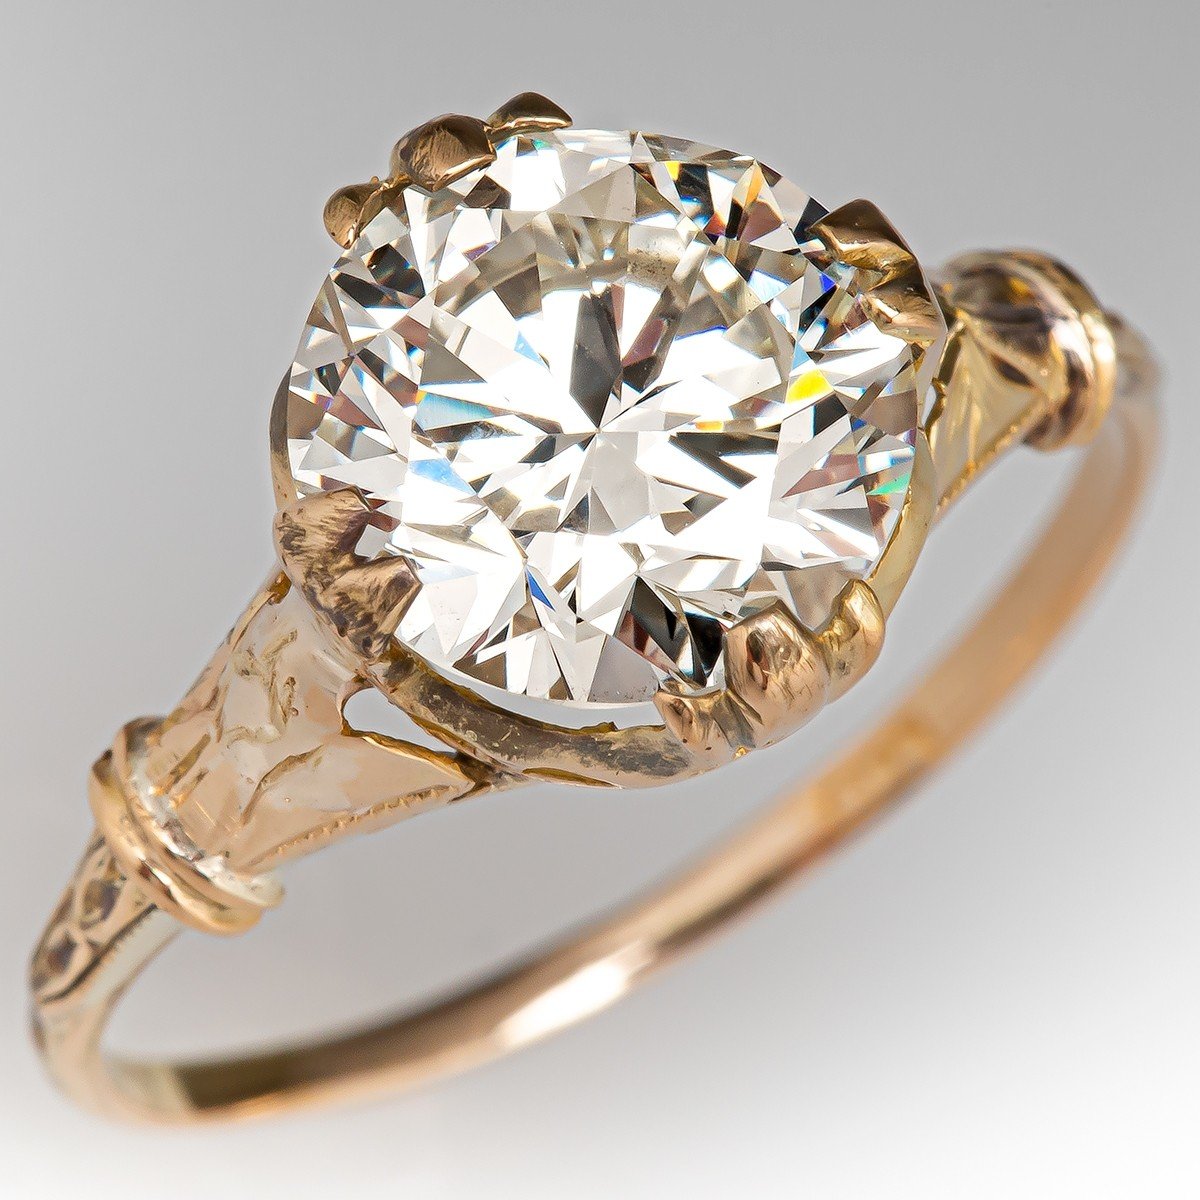 Unique Vintage and Contemporary Engagement Rings | FredLeighton.com